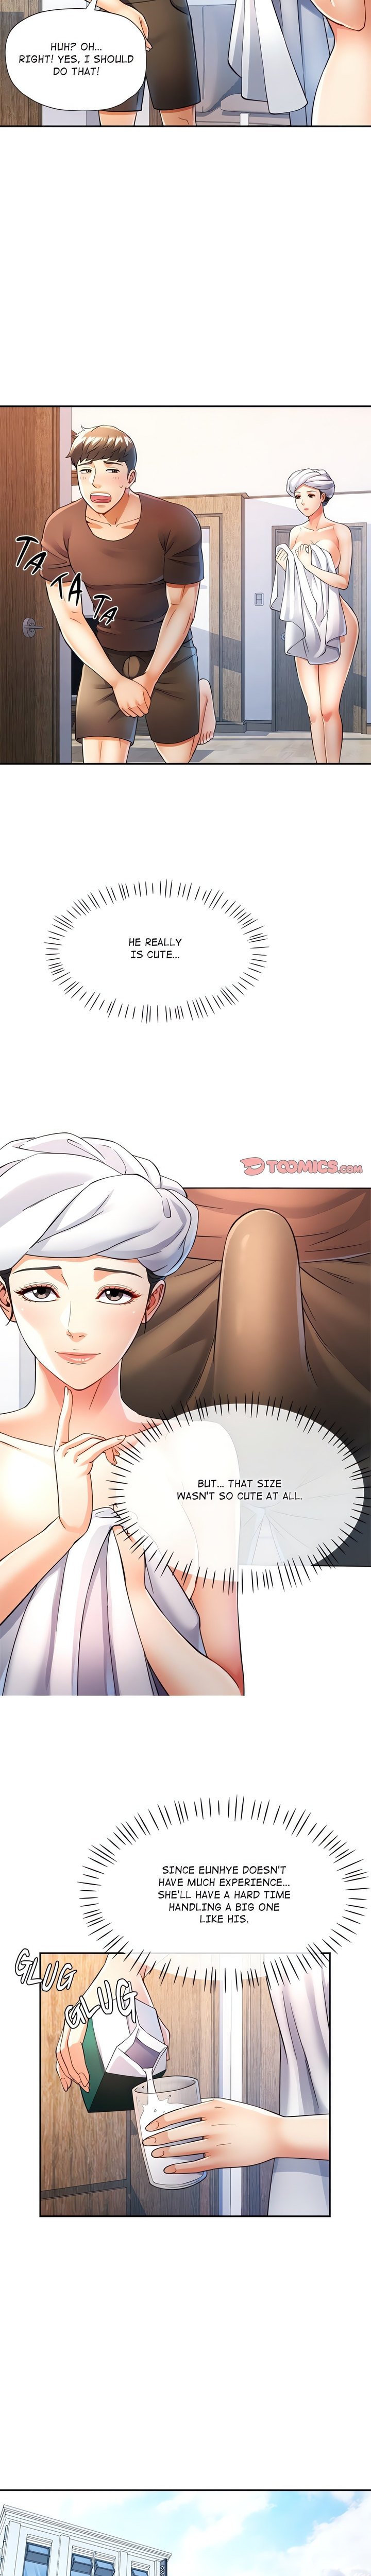 in-her-place-chap-26-4